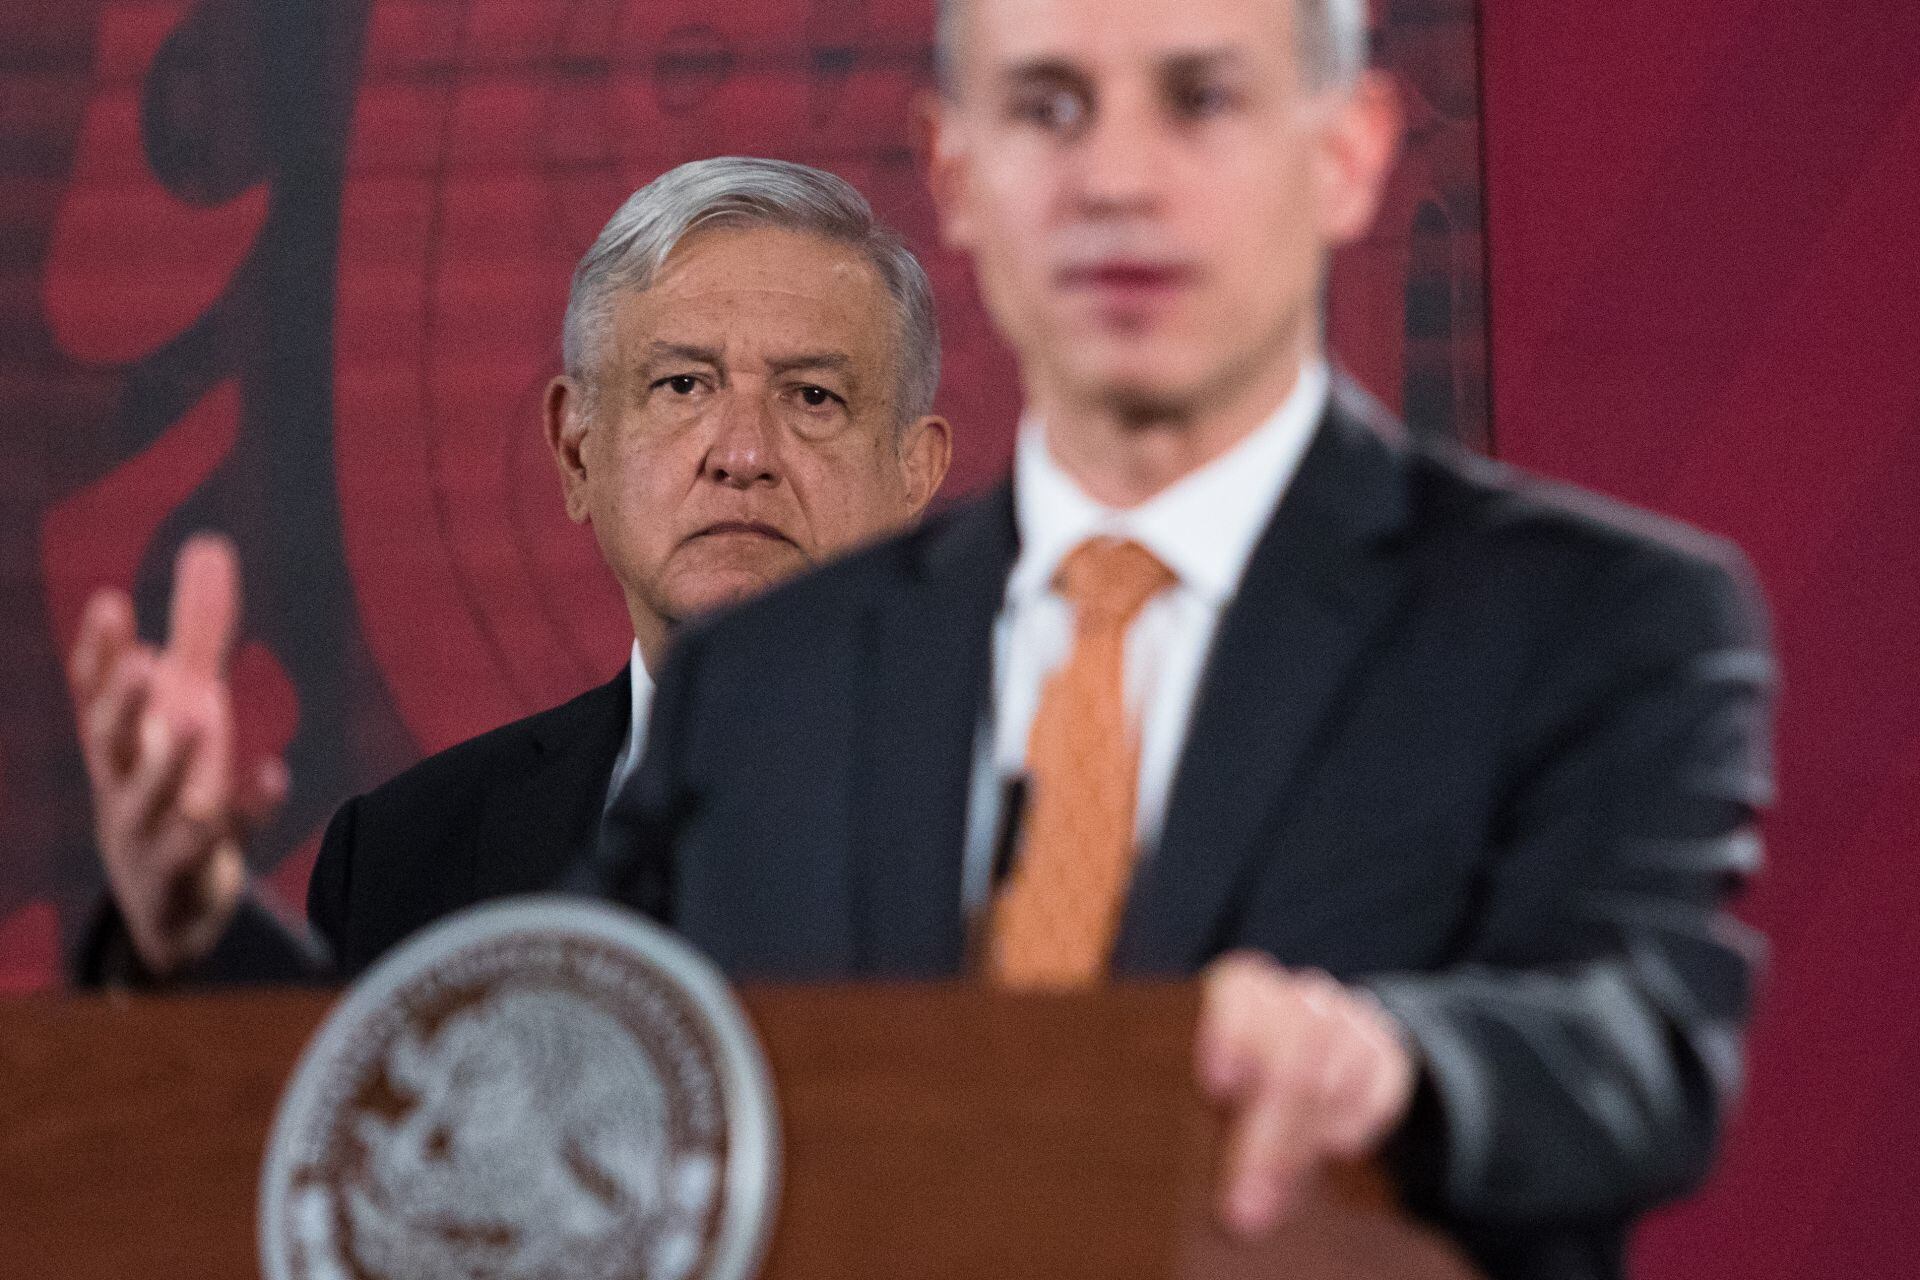 Investigation against López-Gatell is the product of rancor, hatred and politicking, says AMLO